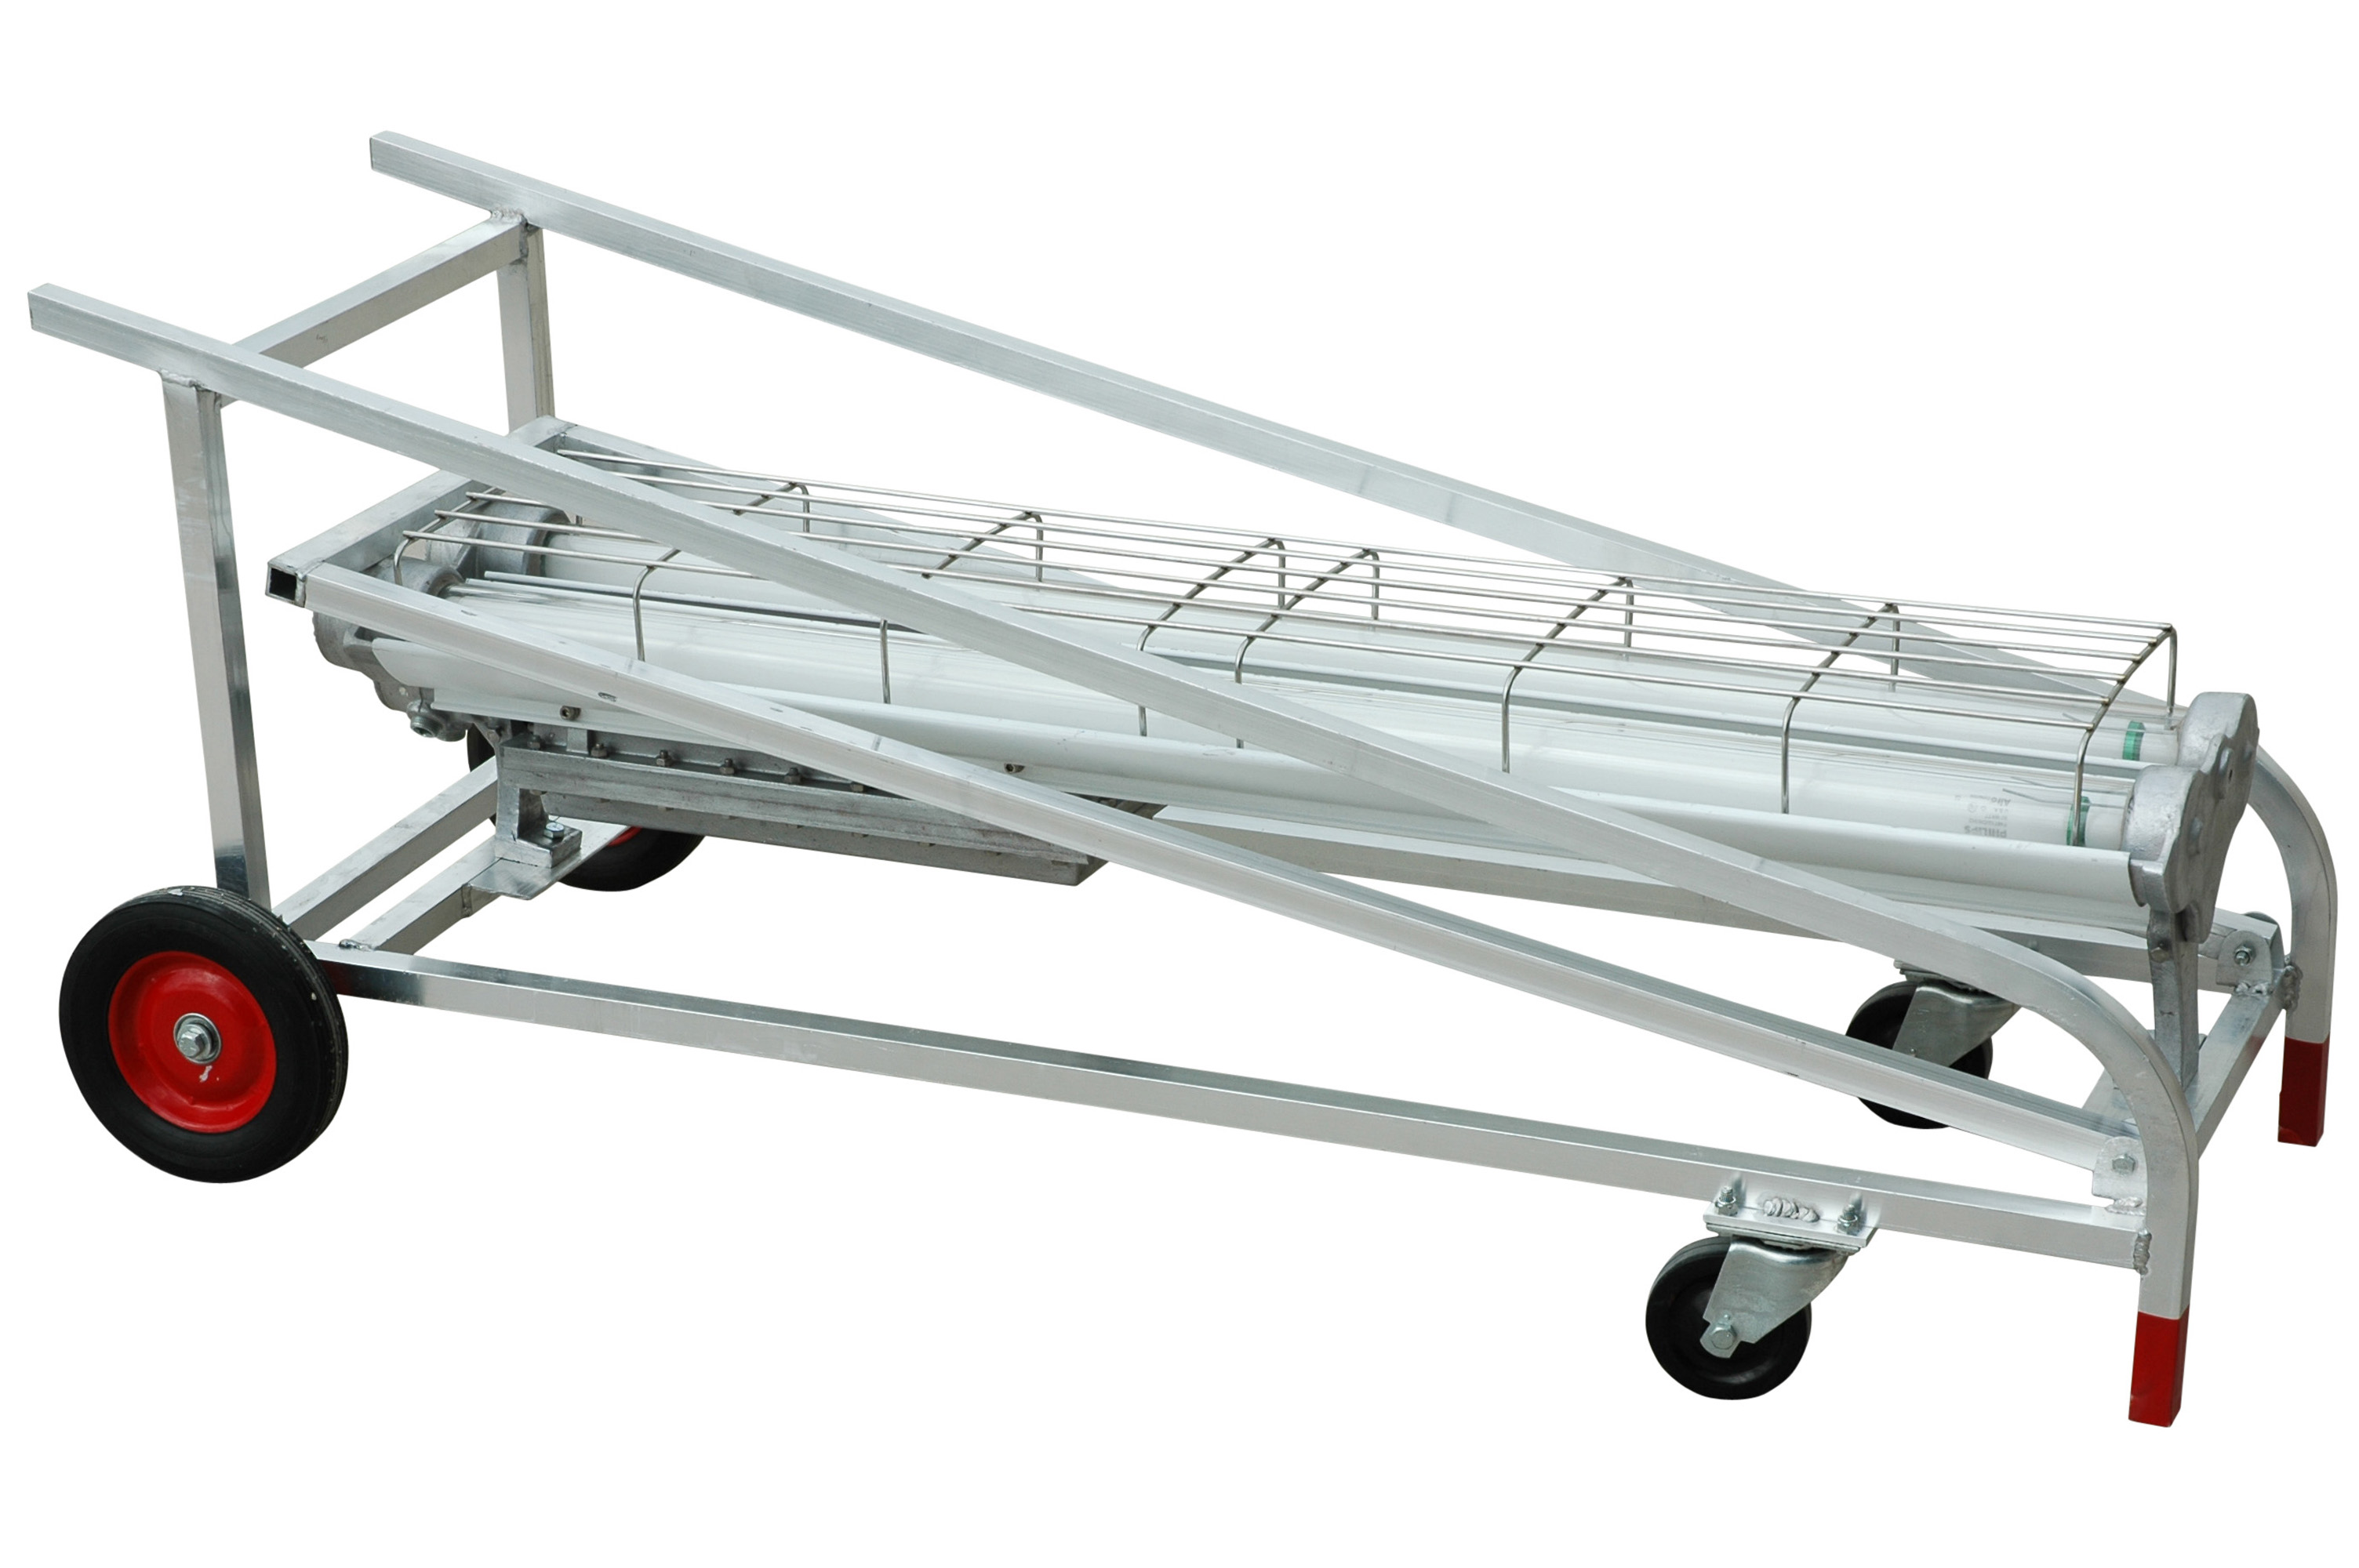 Larson Electronics Releases Updated Explosion Proof Fluorescent Light Cart